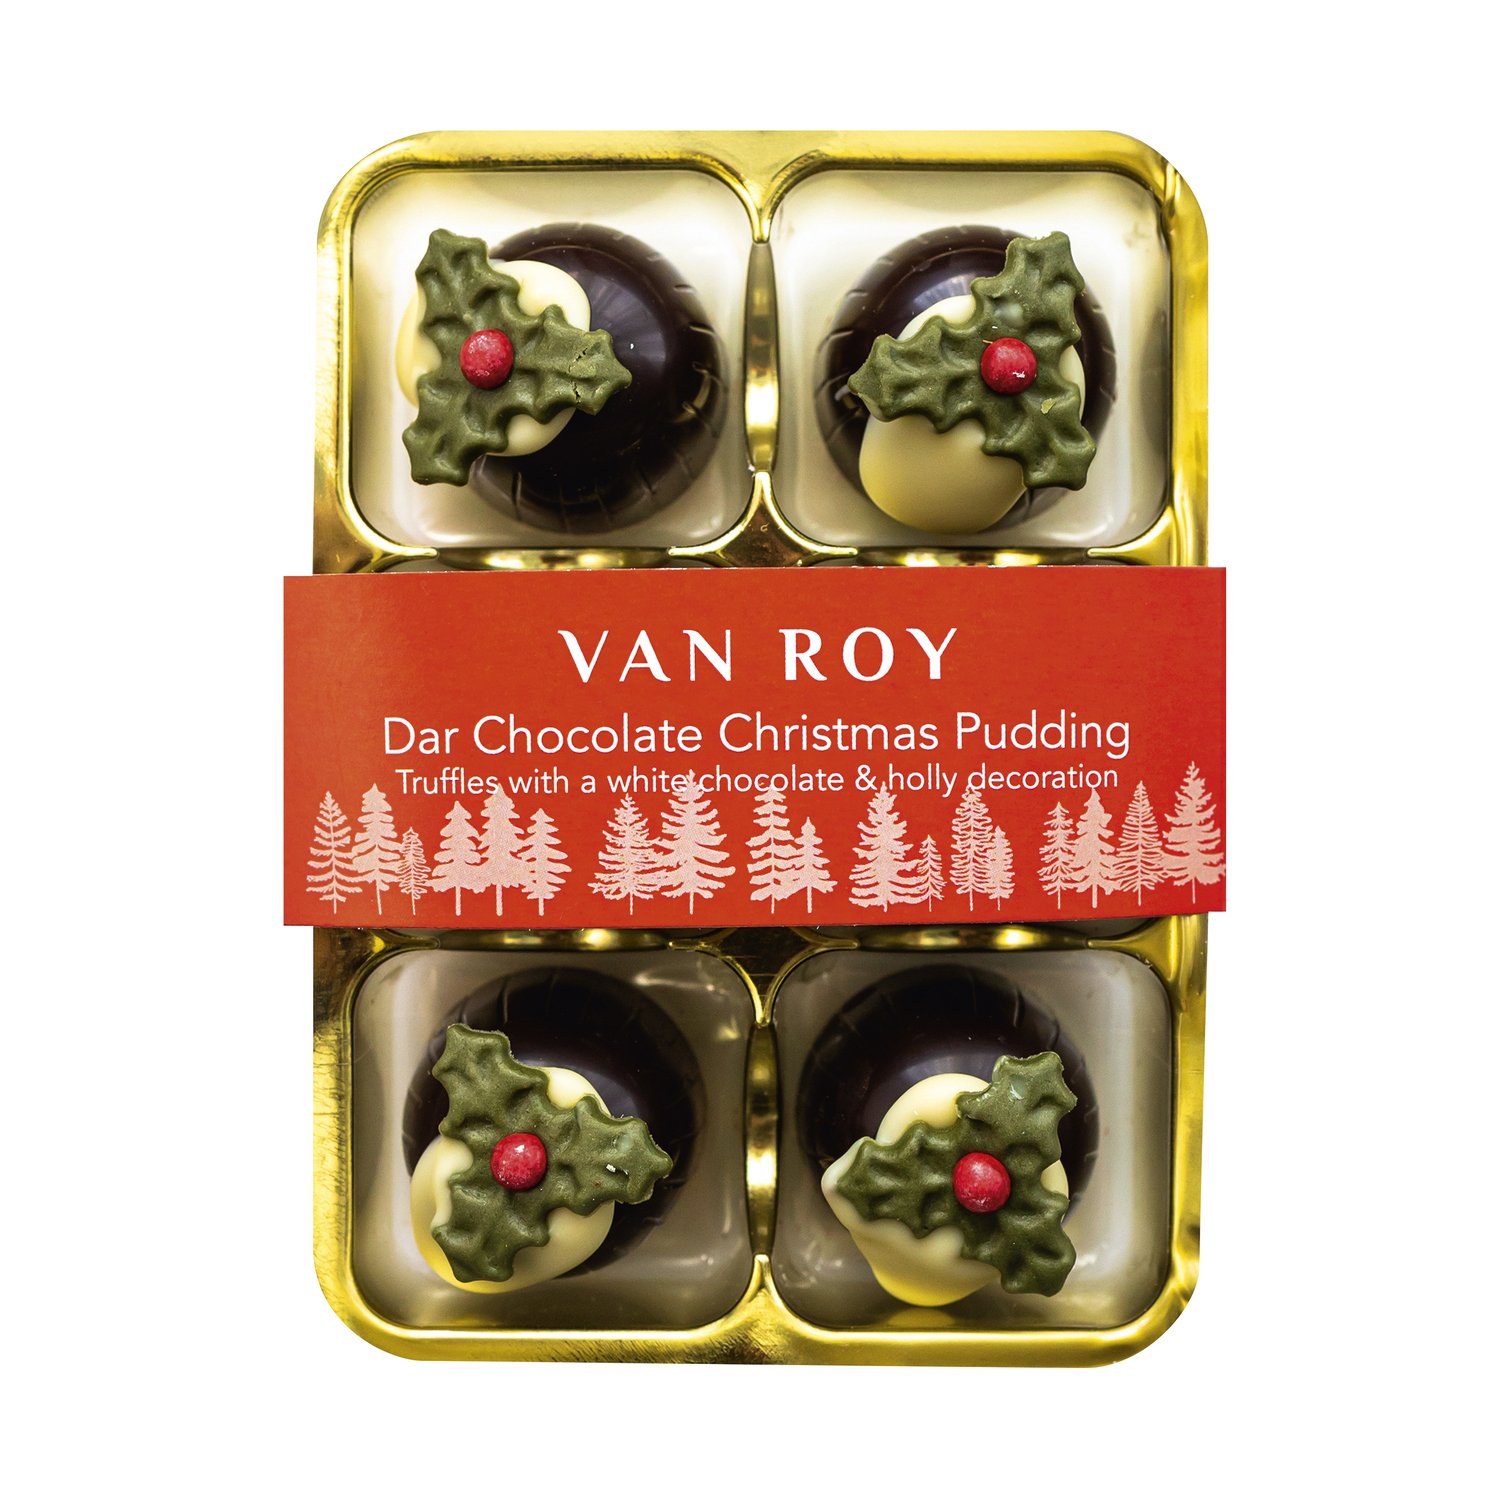 Dark choc Christmas pudding with rum truffle centre in clear gift pack - 6x65g